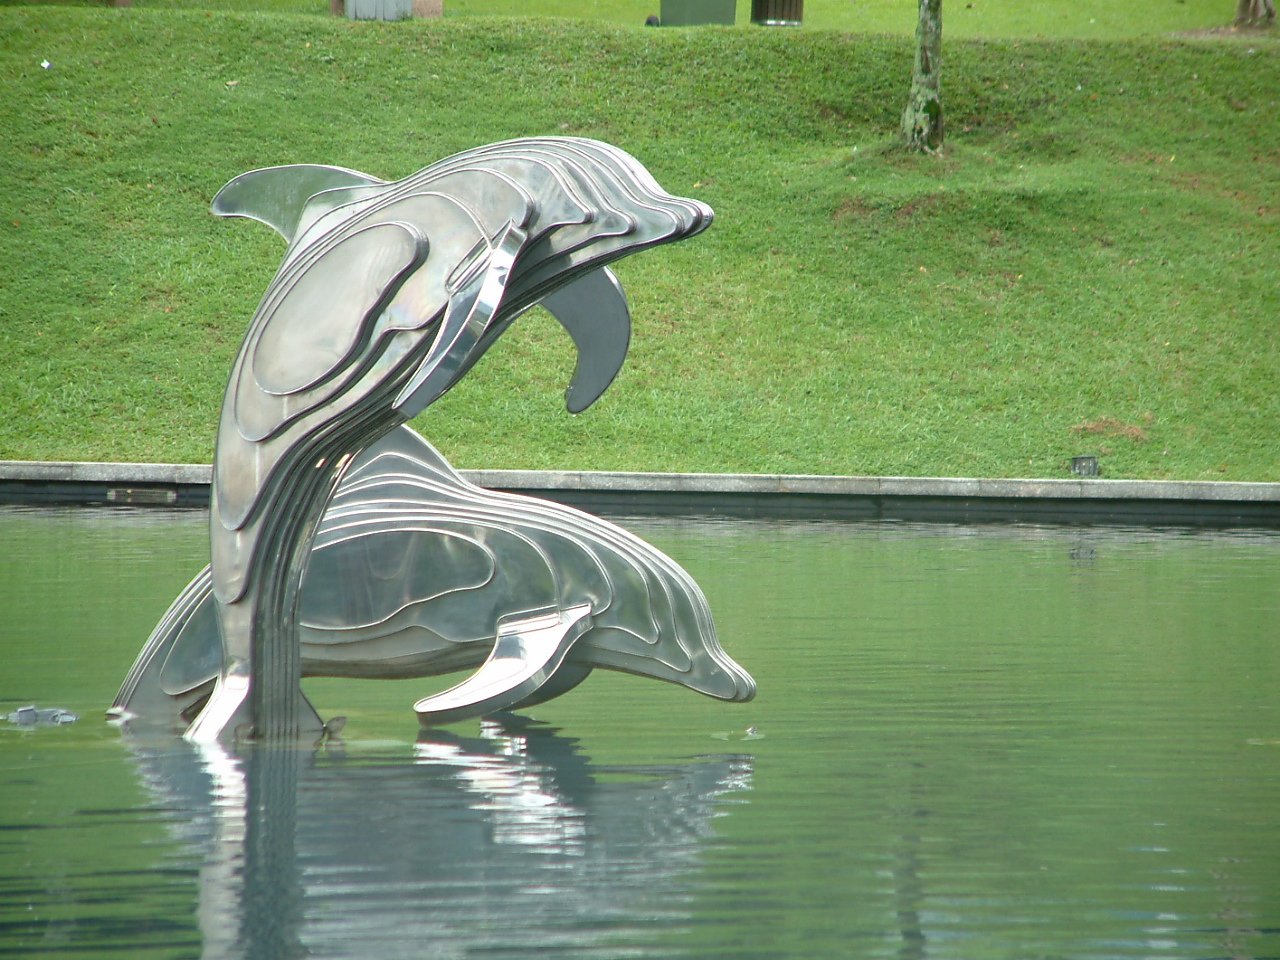 a metal dolphins sculpture is in the water